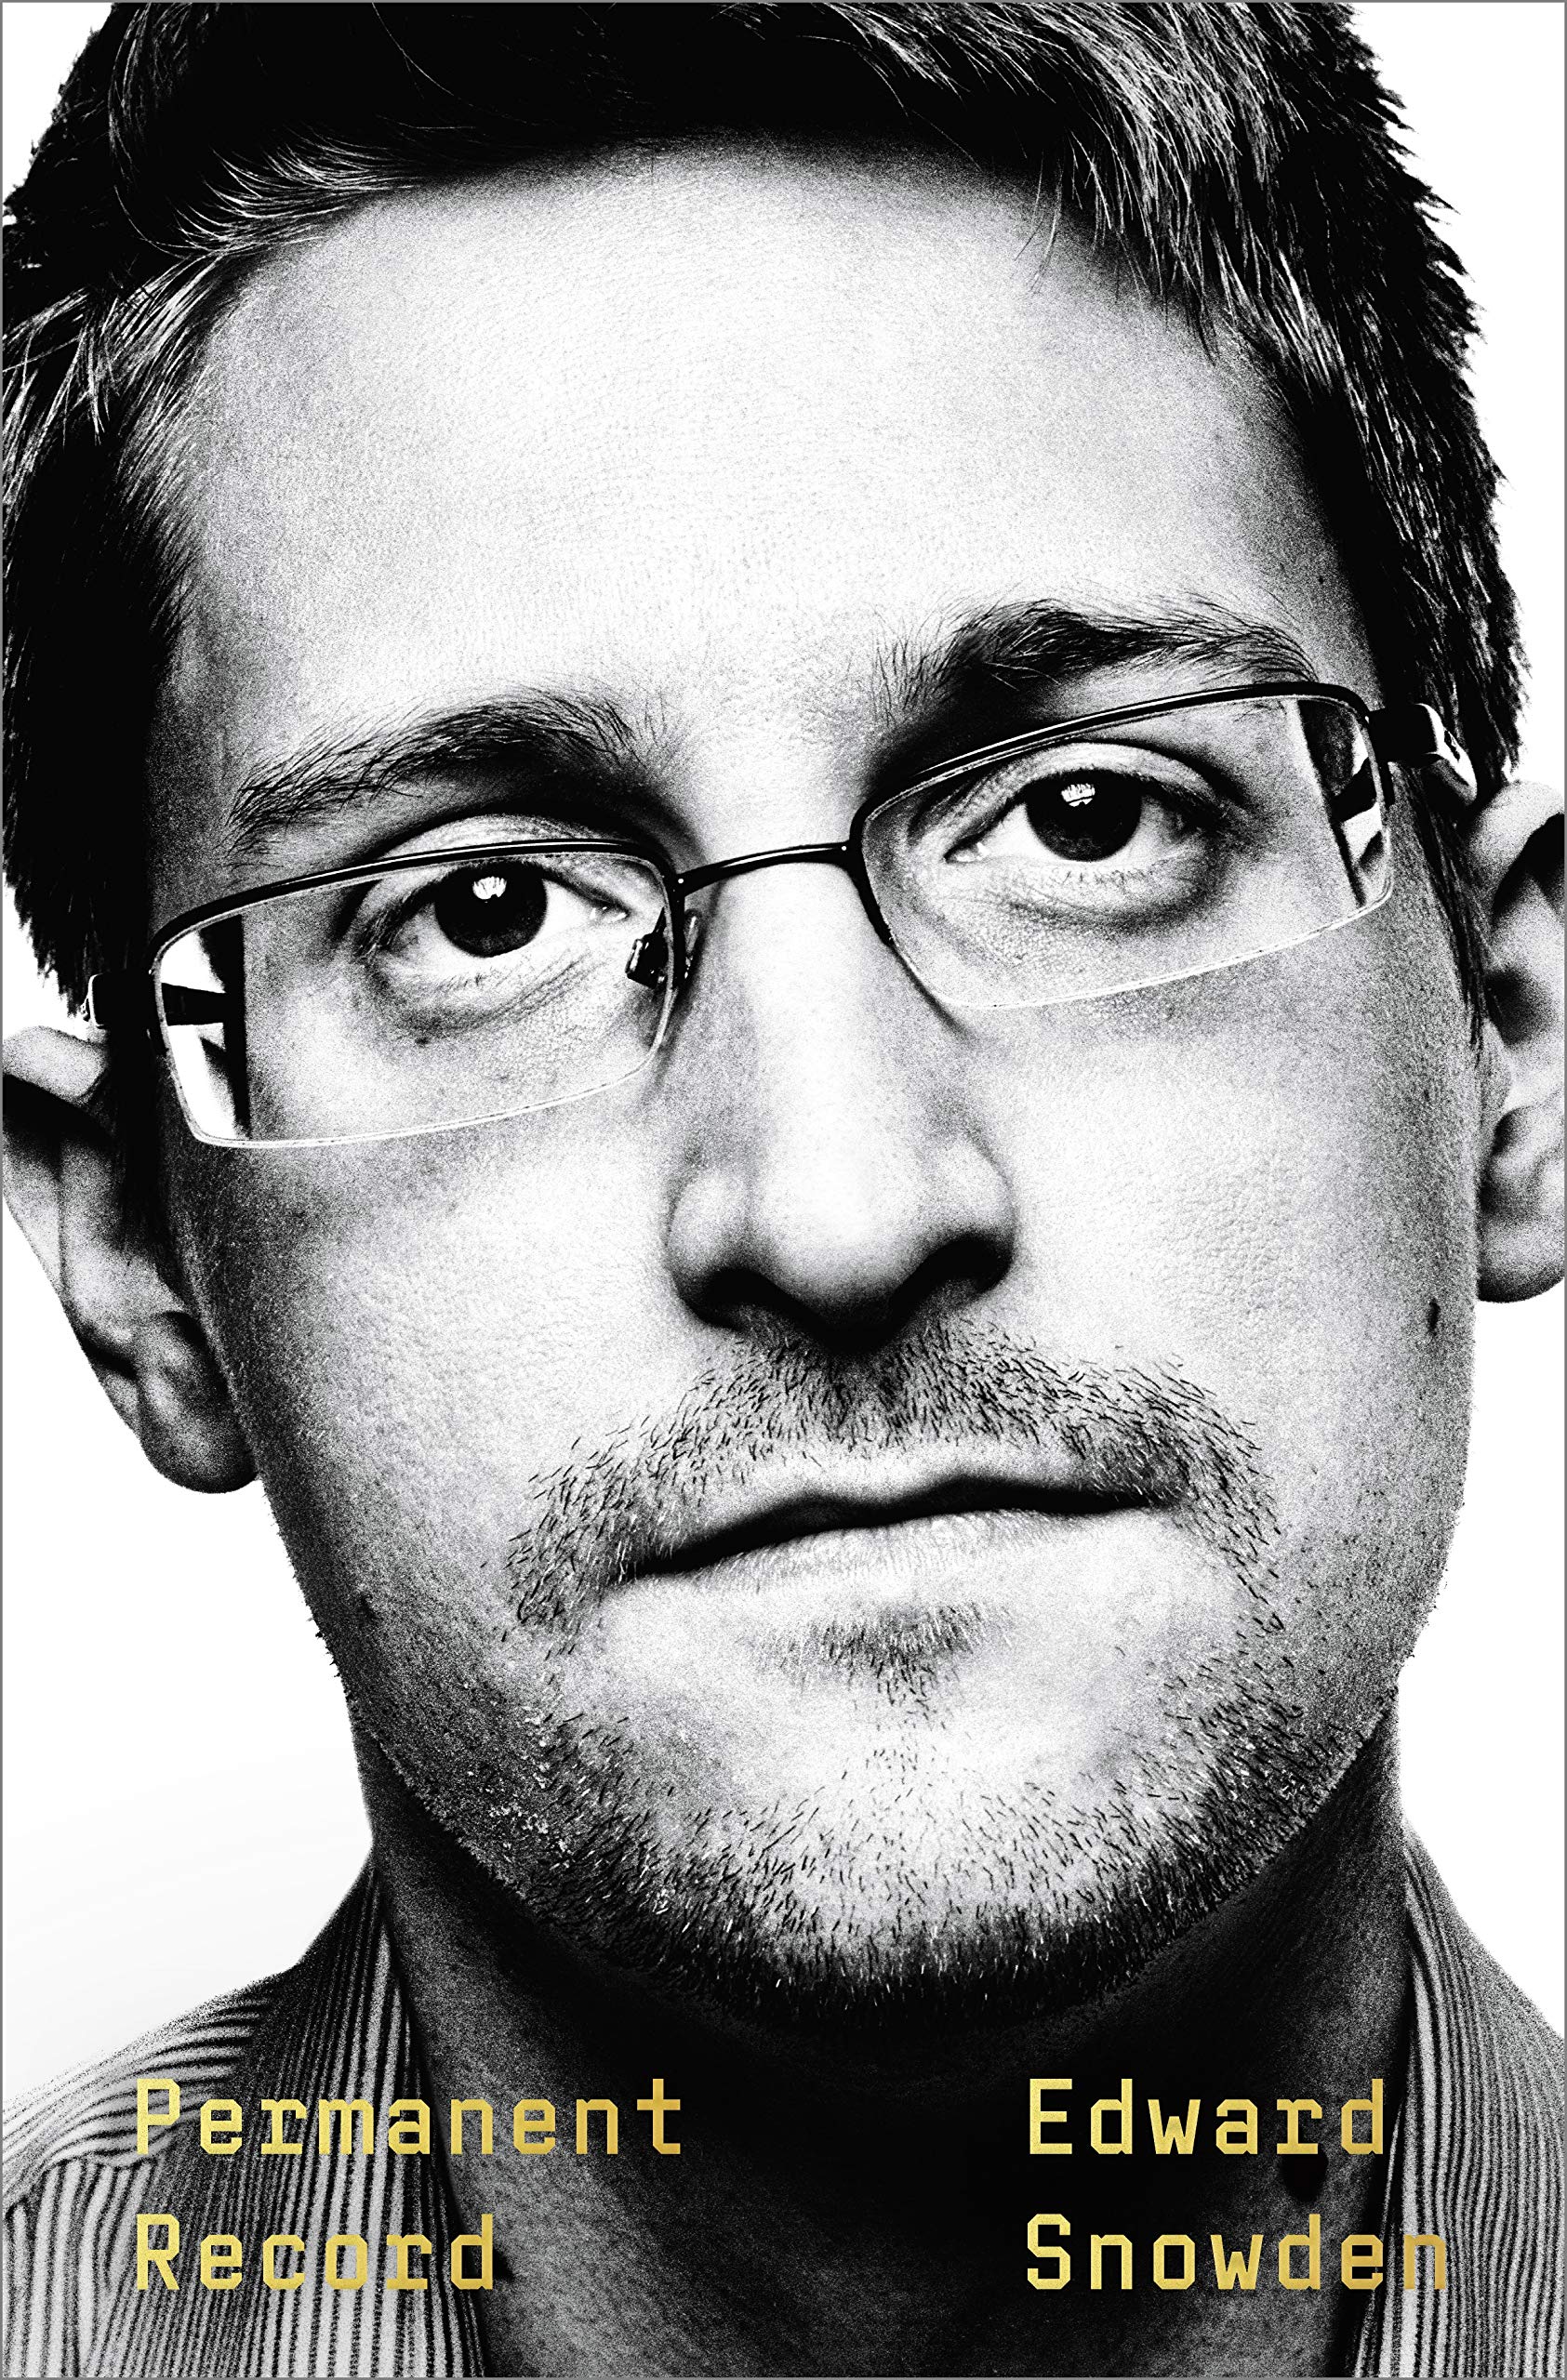 The cover of the book Permanent Record displaying a portrait of Edward Snowden